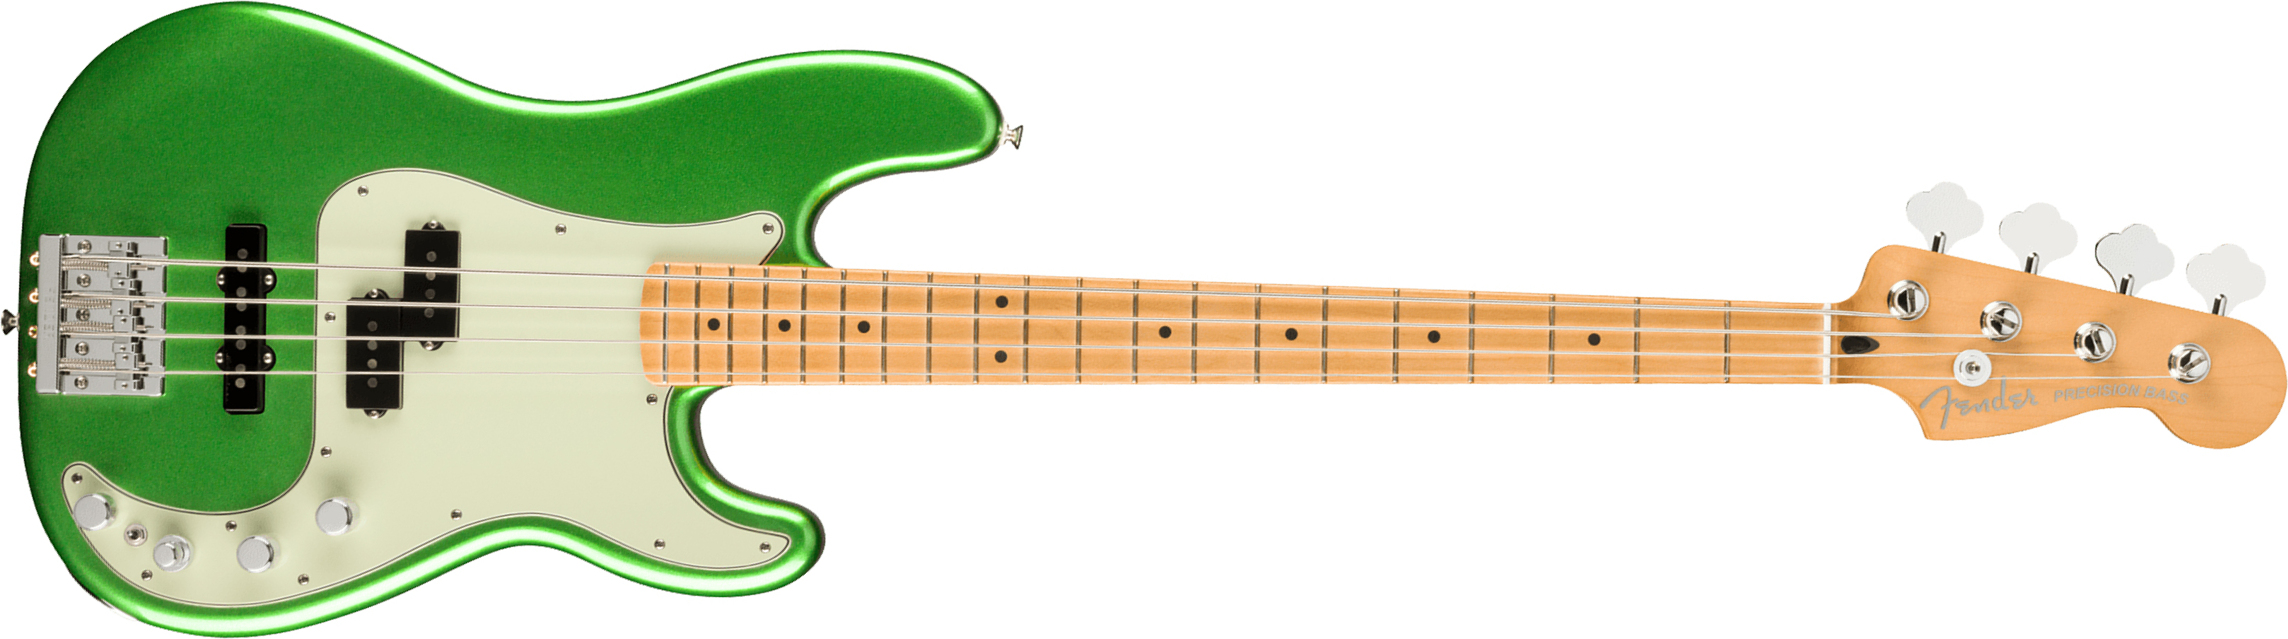 Fender Precision Bass Player Plus Mex Active Mn - Cosmic Jade - Solidbody E-bass - Main picture